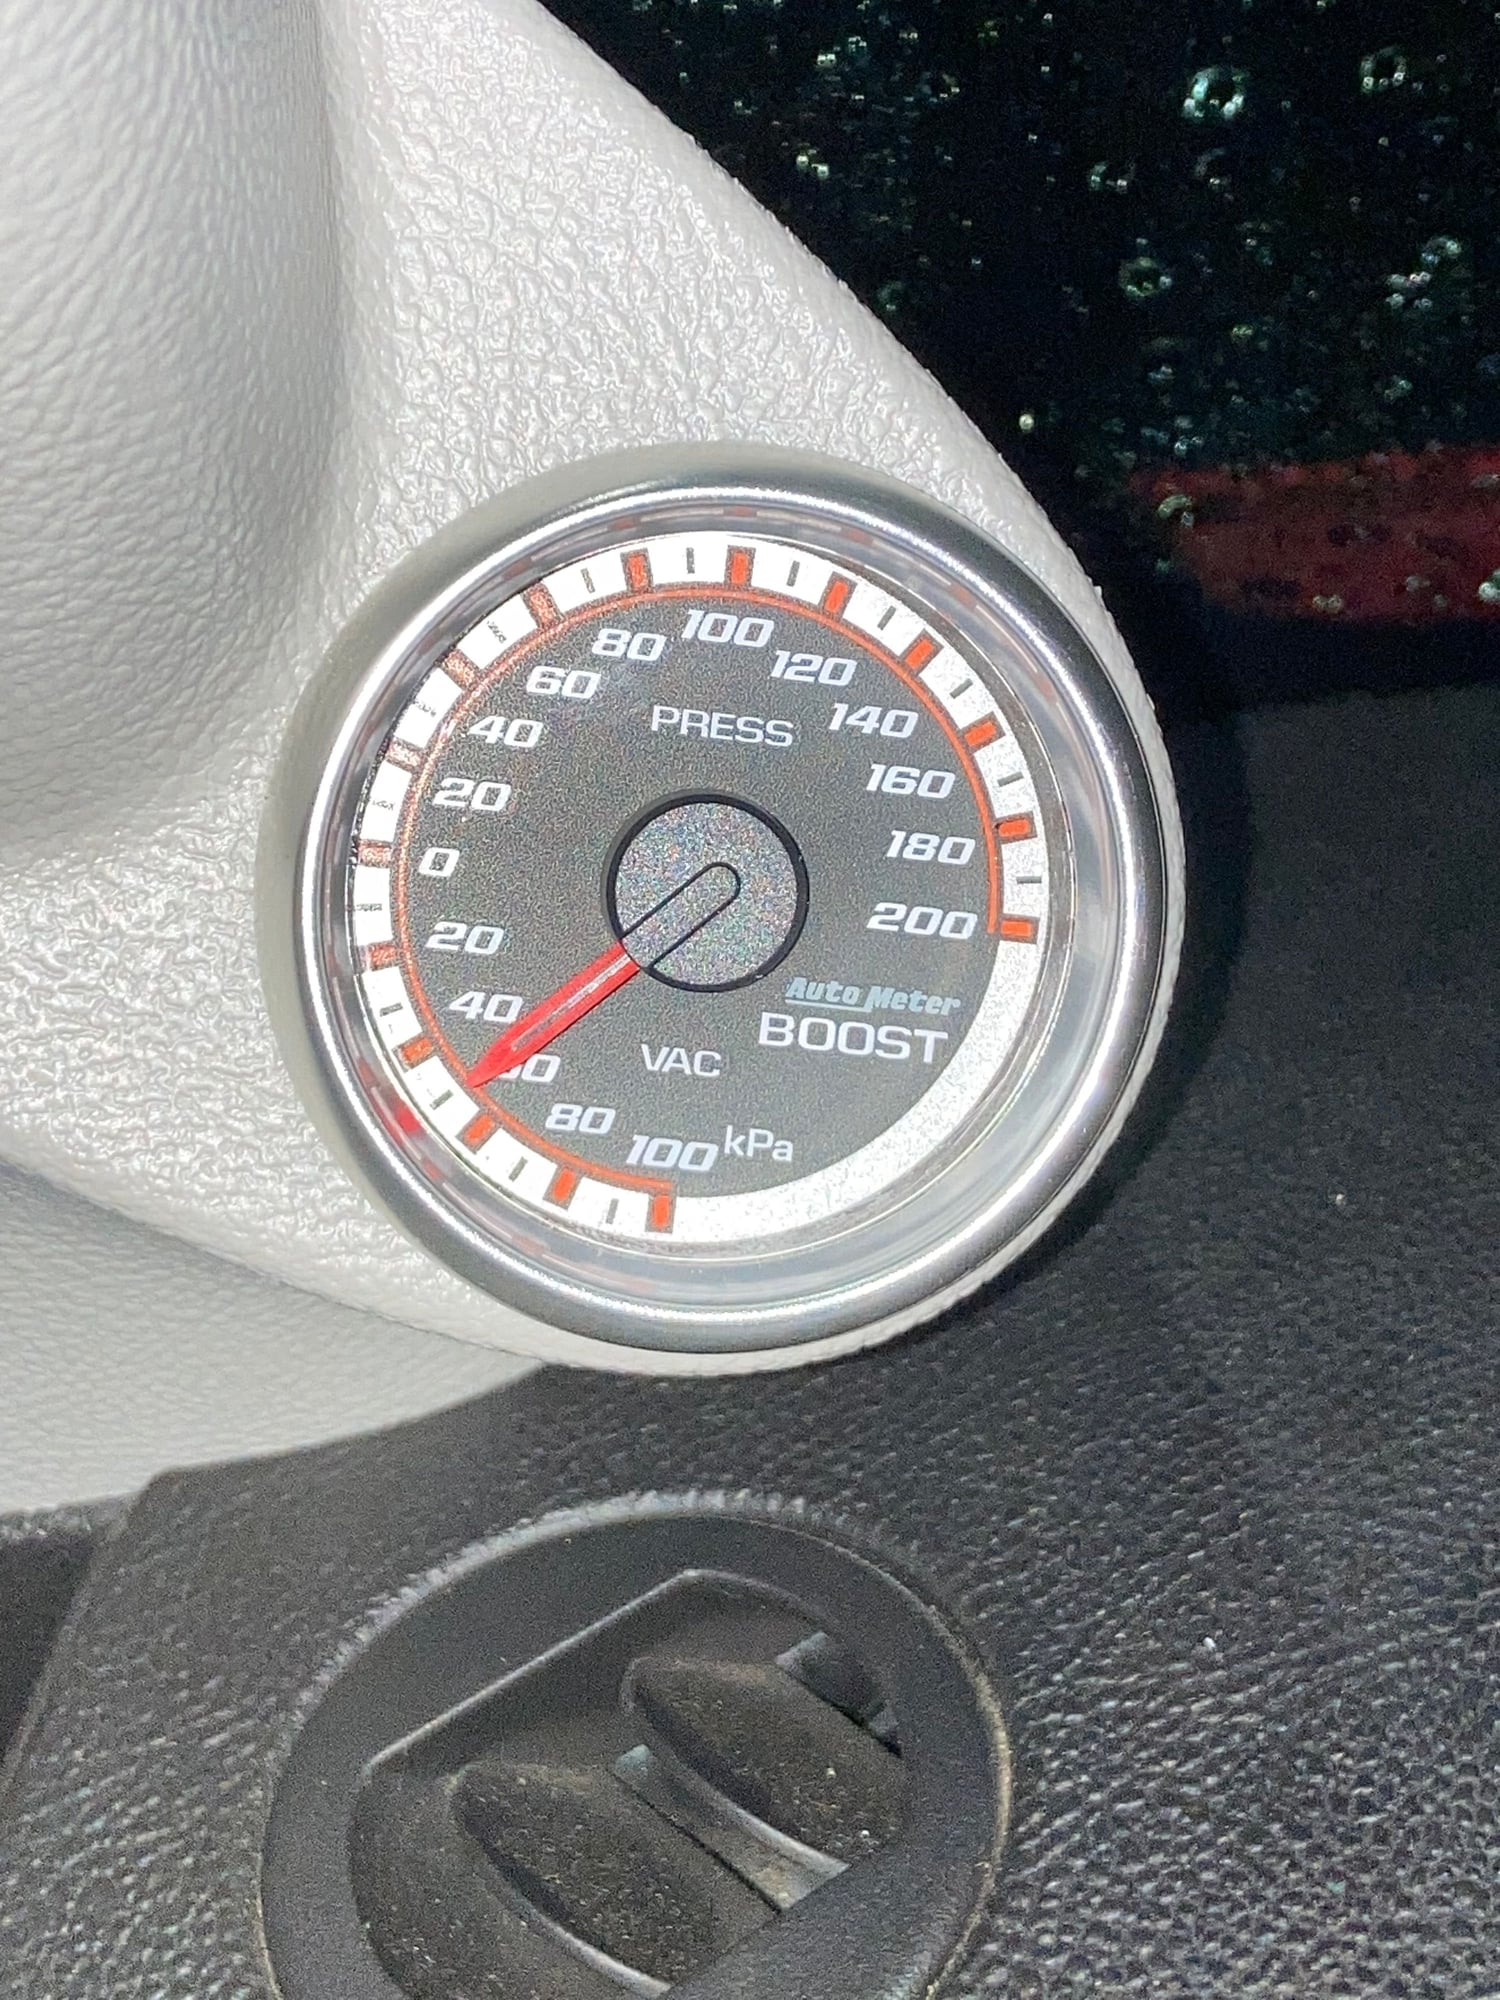 Accessories - Pillar Mounted Boost/Vacuum Gauge in PSI - New or Used - 2008 to 2010 Chevrolet HHR - Kemptville, ON K0G1J0, Canada